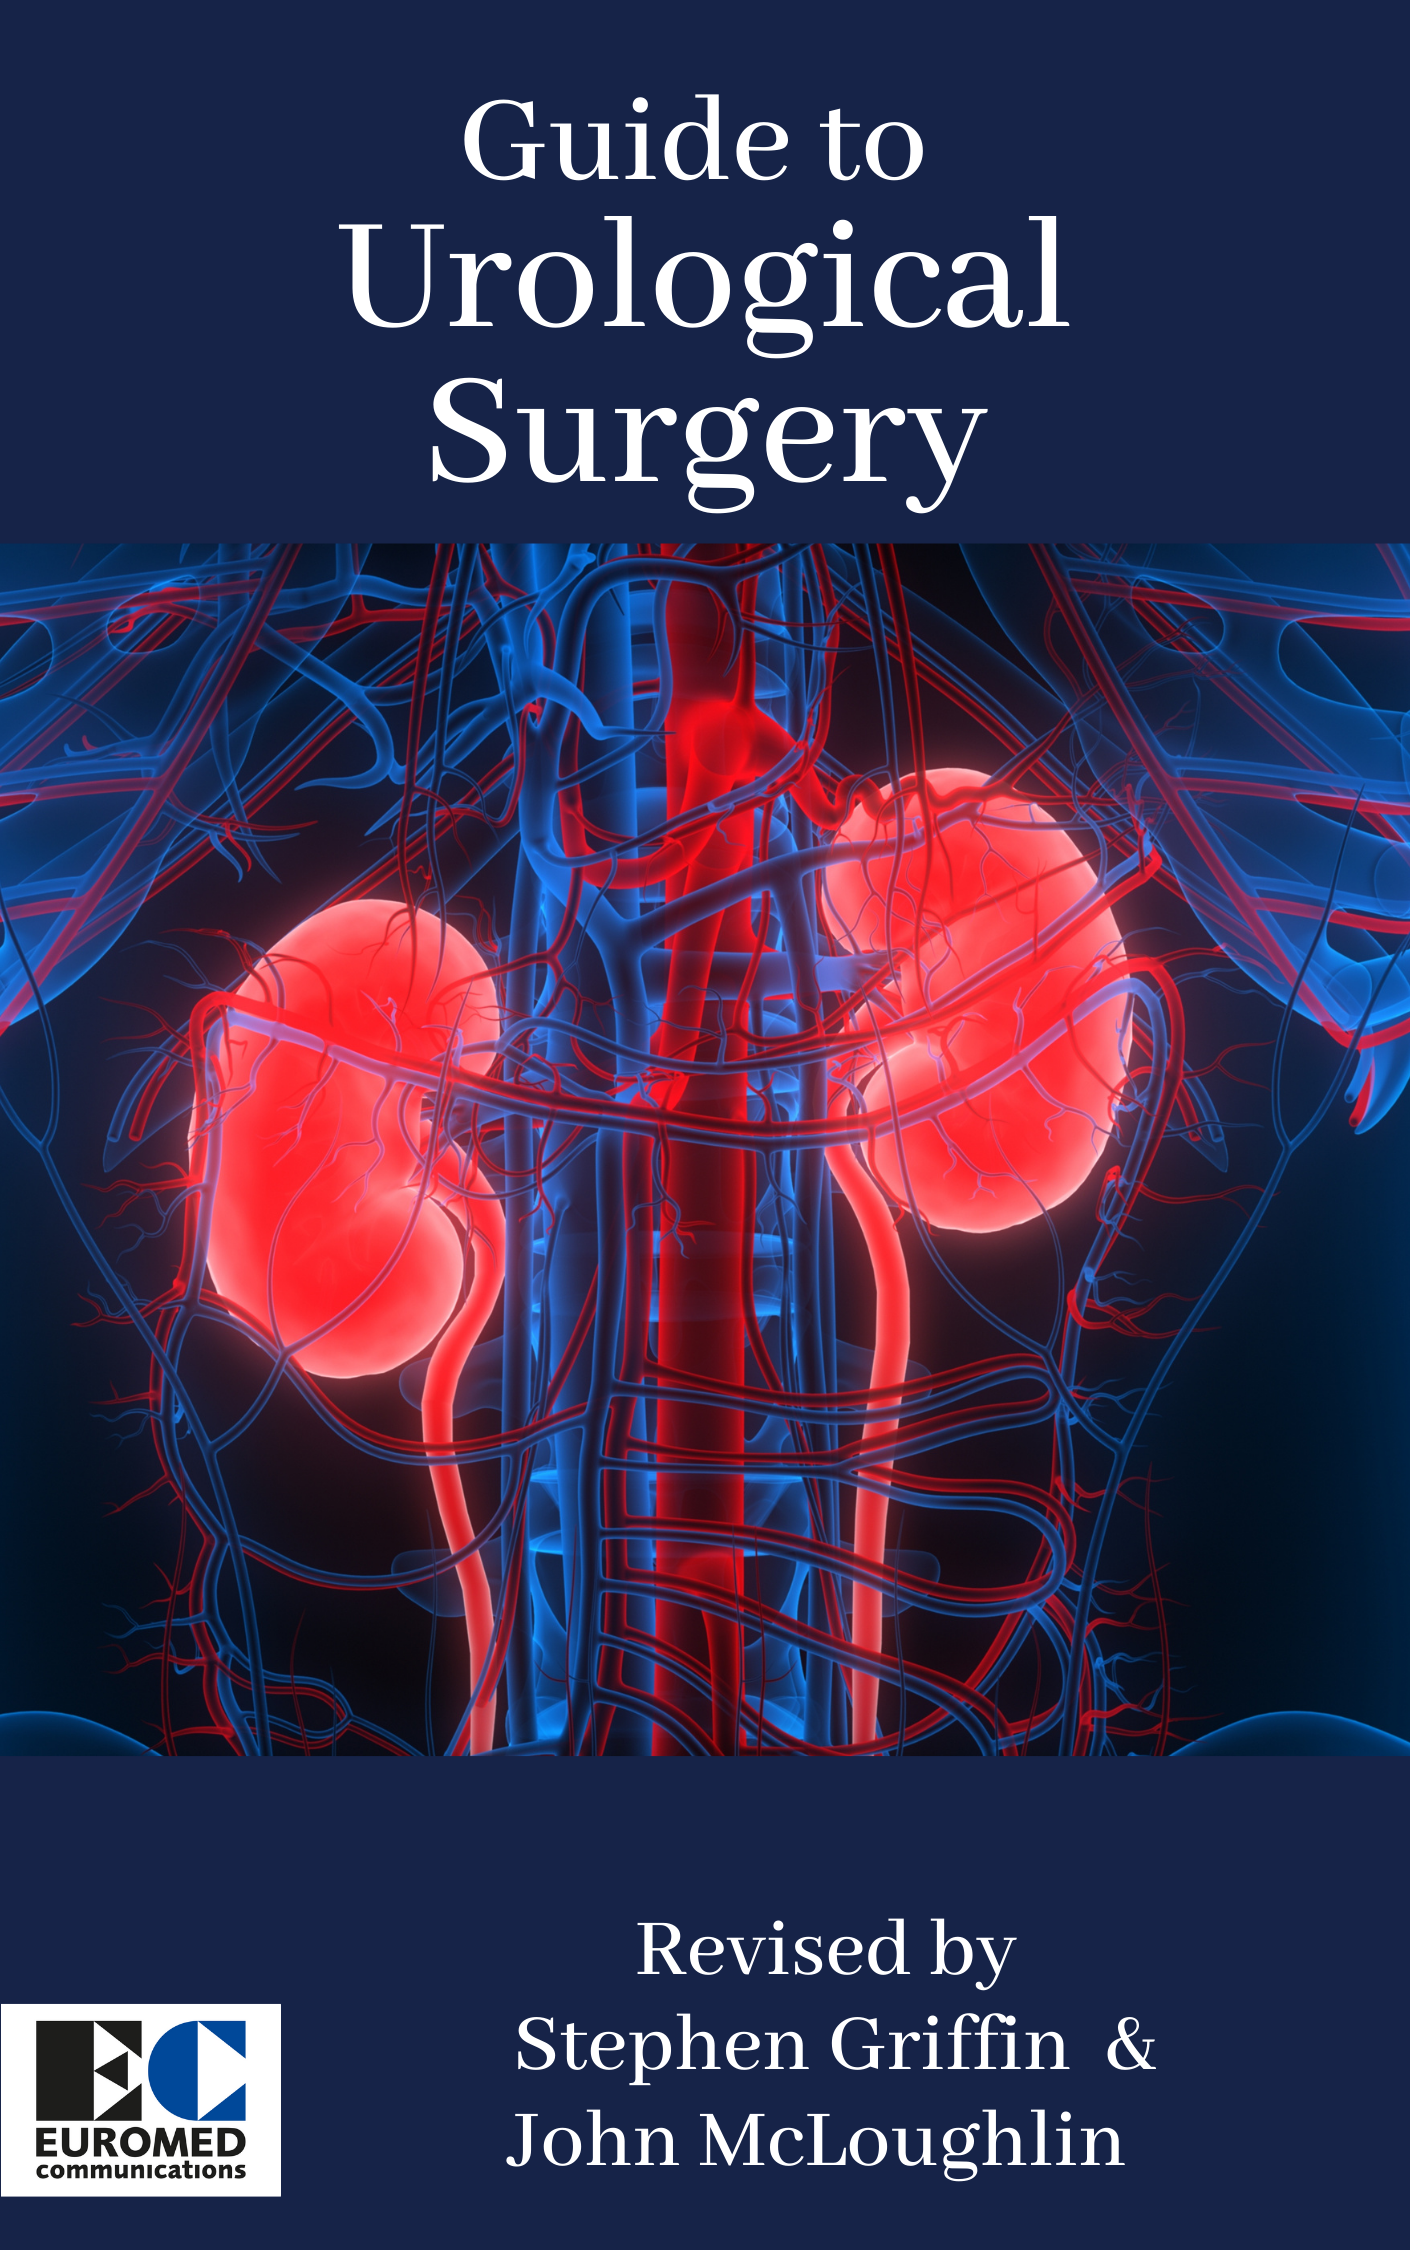 Guide to Urological Surgery